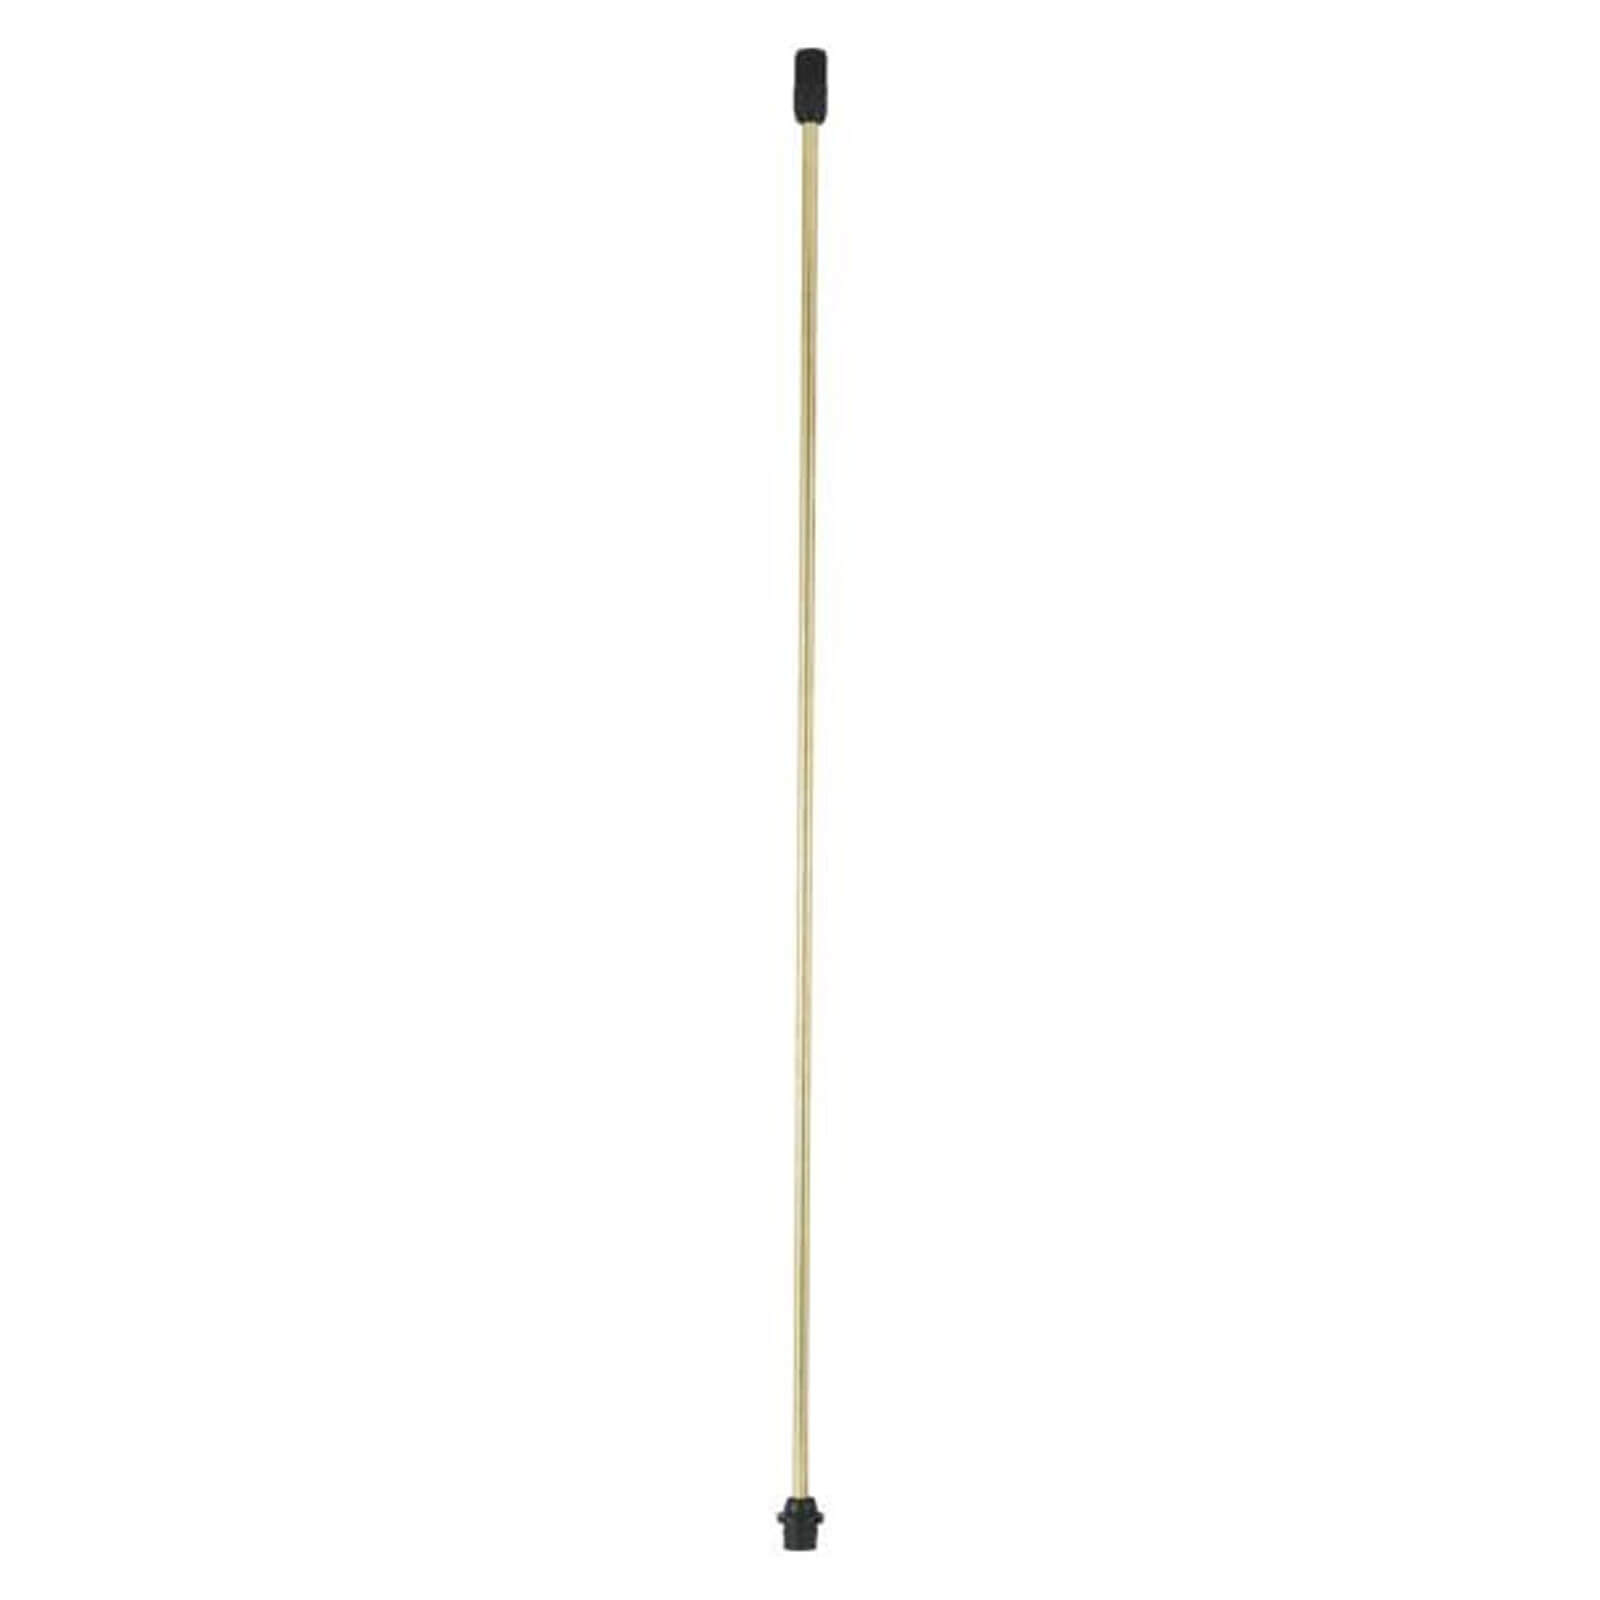 Image of Solo Brass Spray Lance for Pressure Sprayers 0.75m